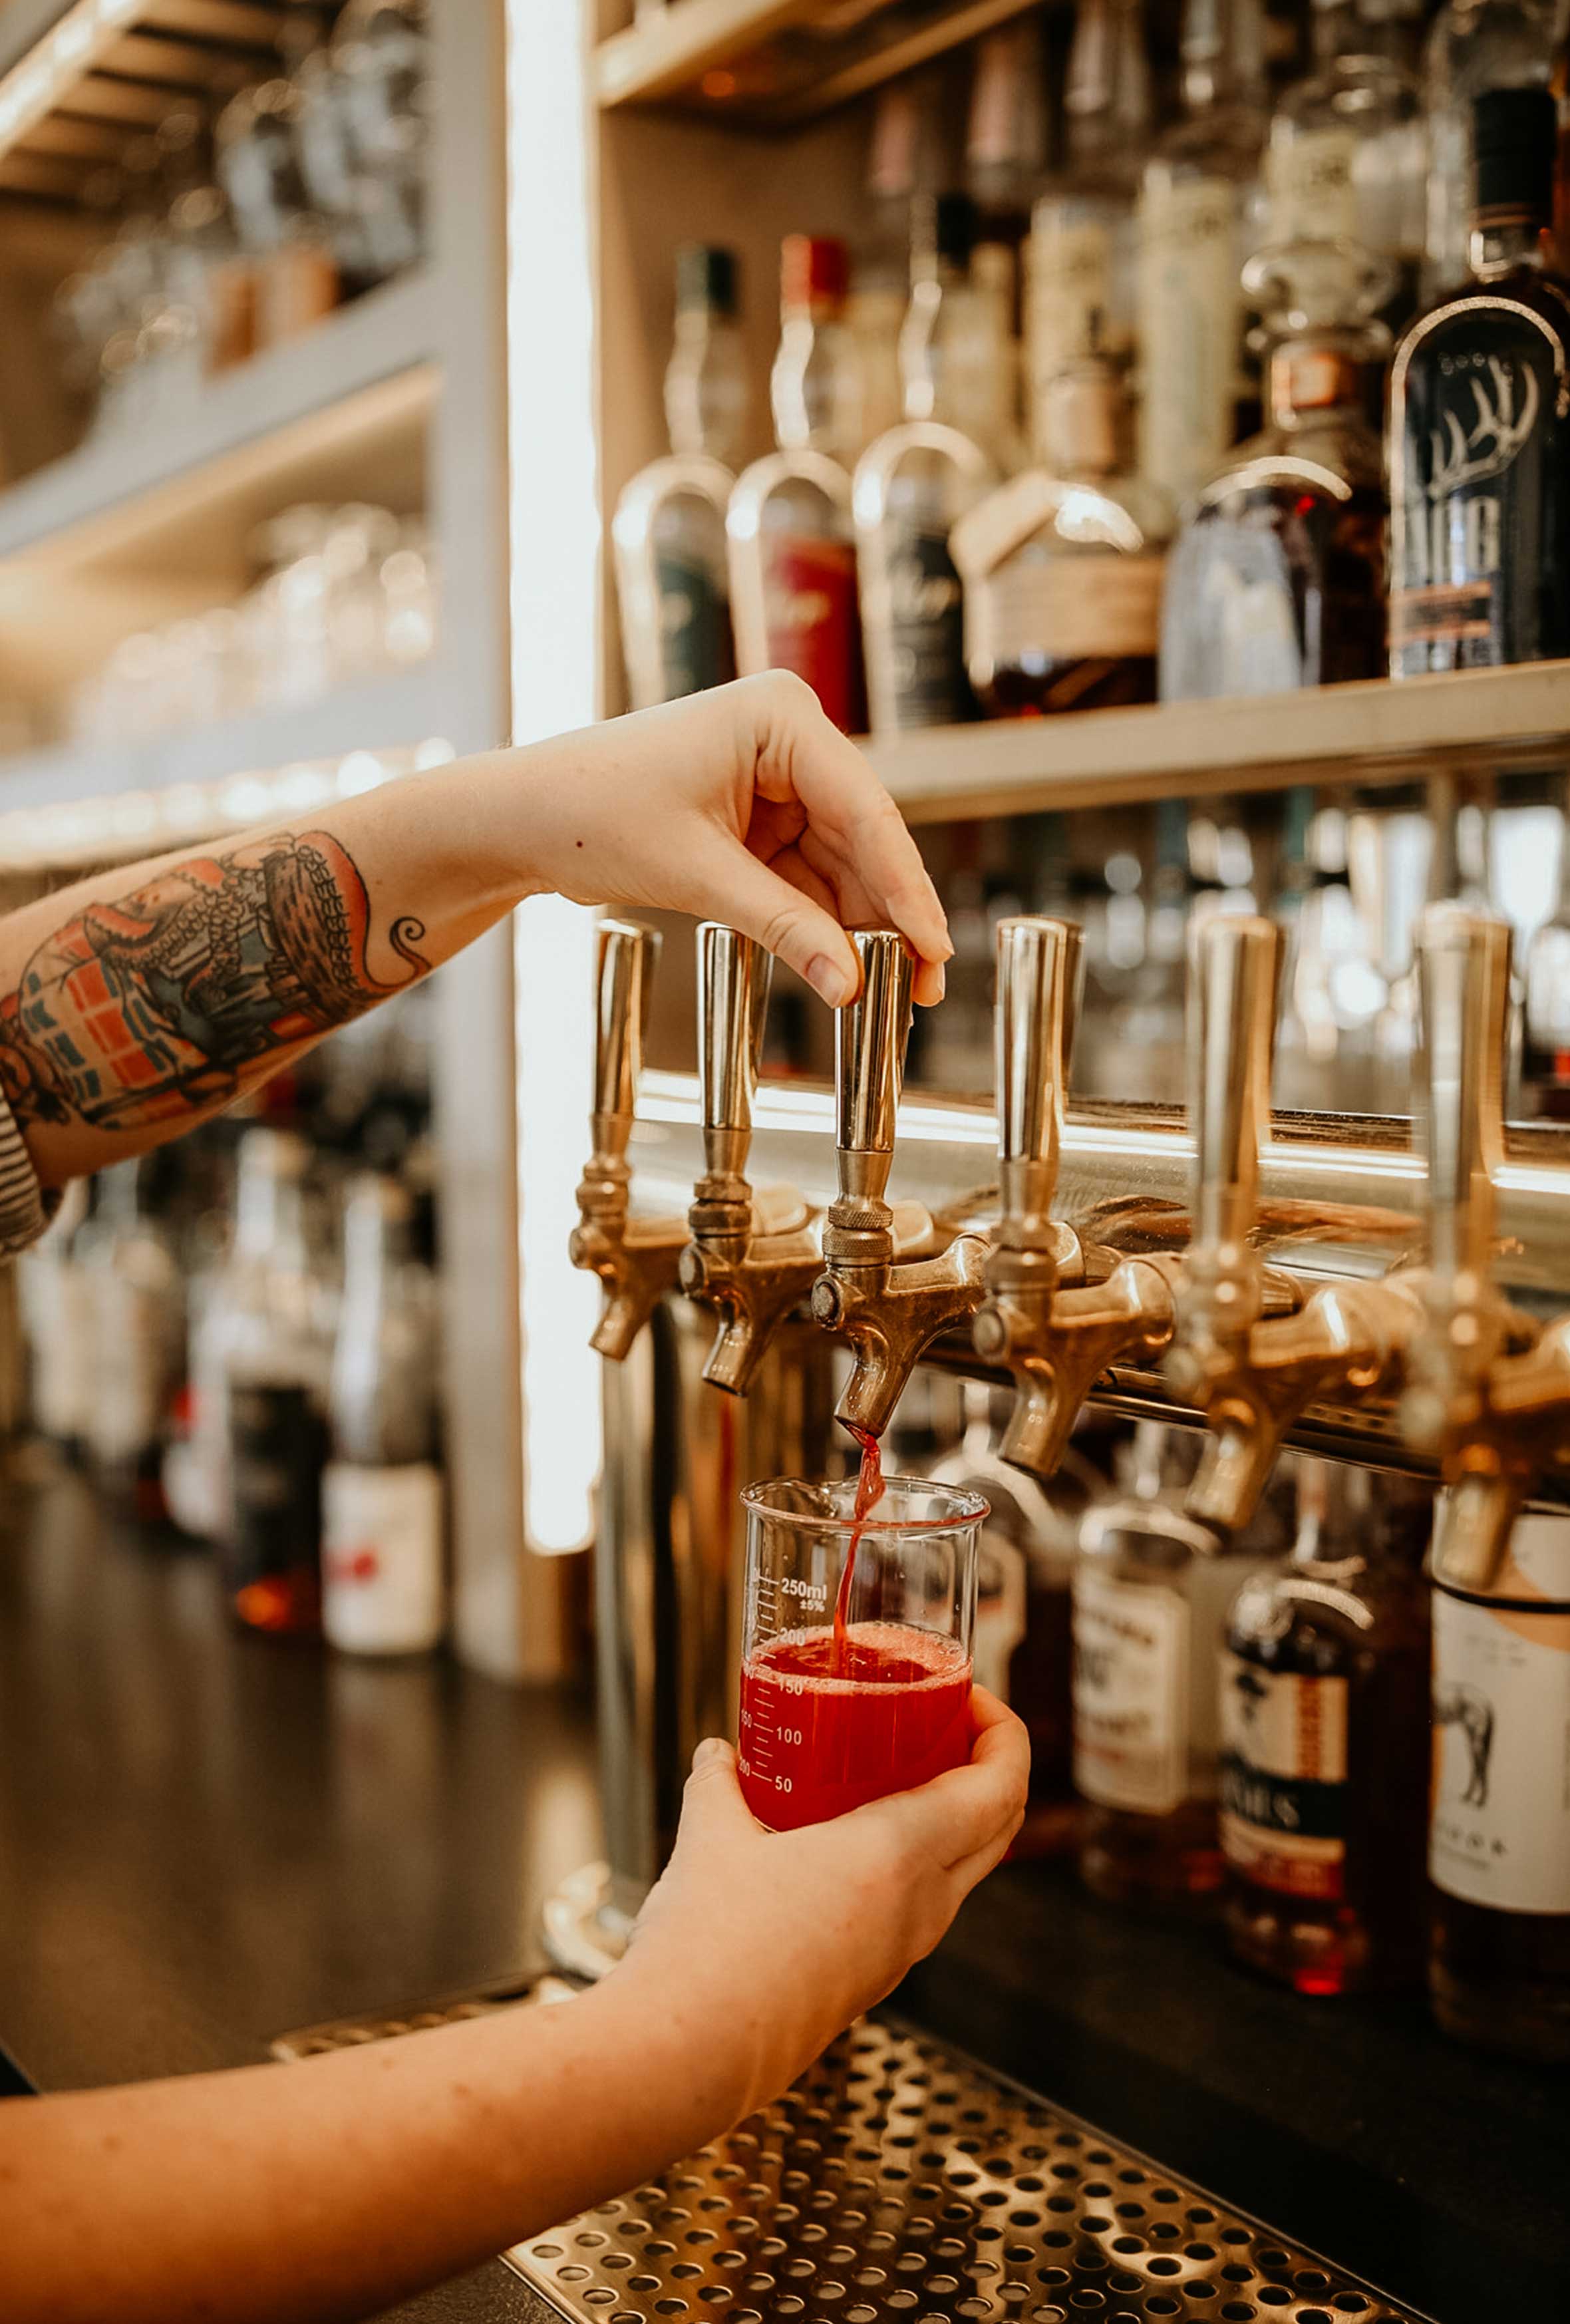 Drinks are on tap at your Chattanooga local restaurant.